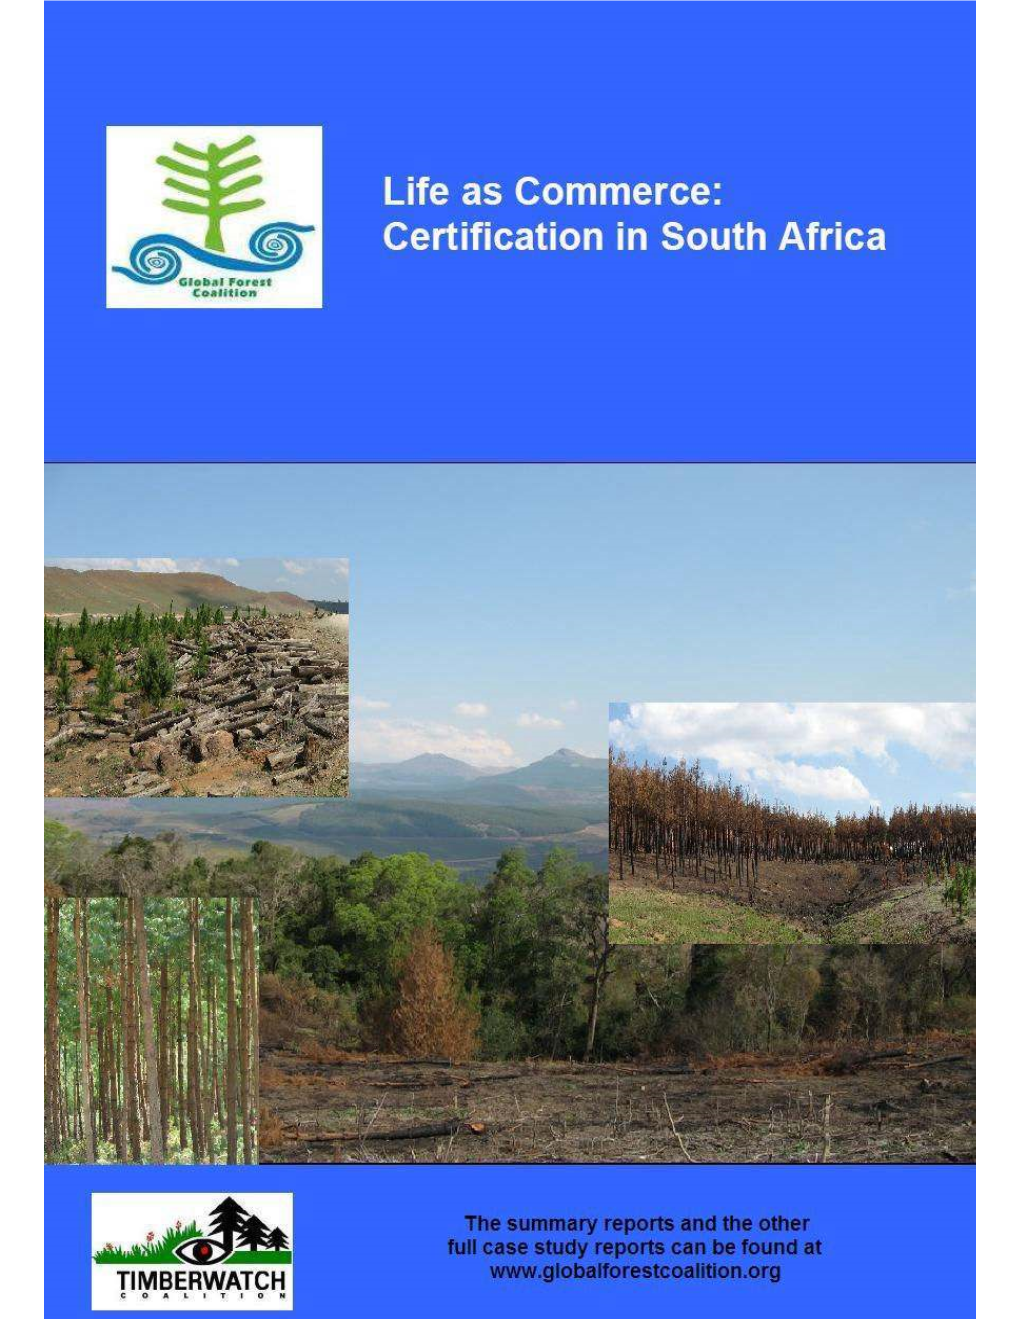 Report on Certification in South Africa